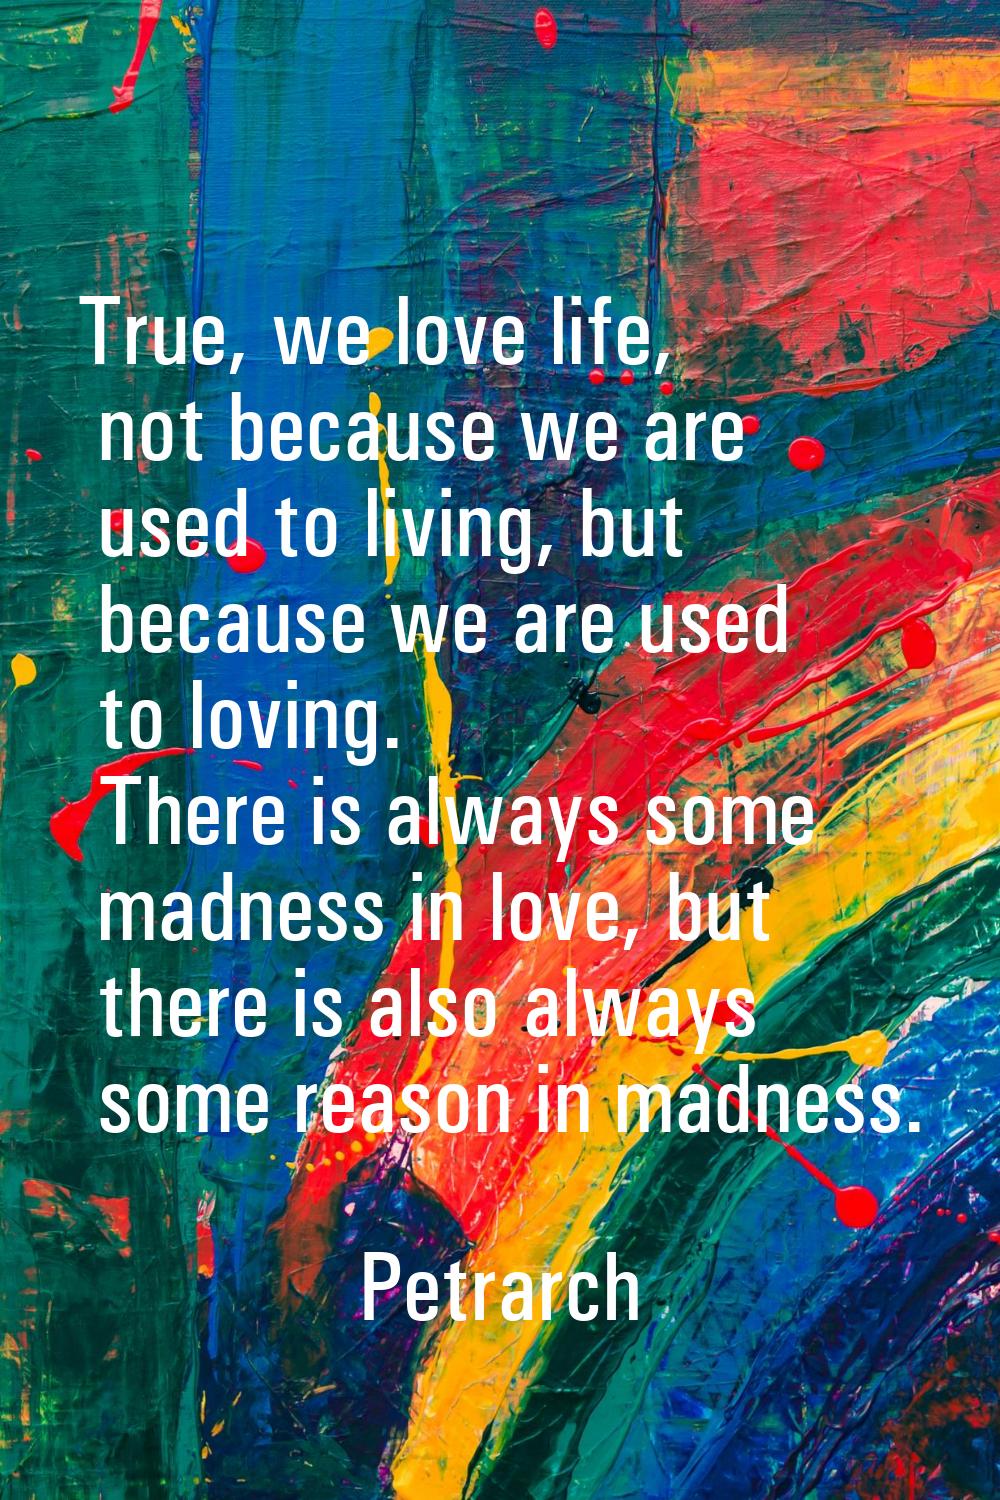 True, we love life, not because we are used to living, but because we are used to loving. There is 